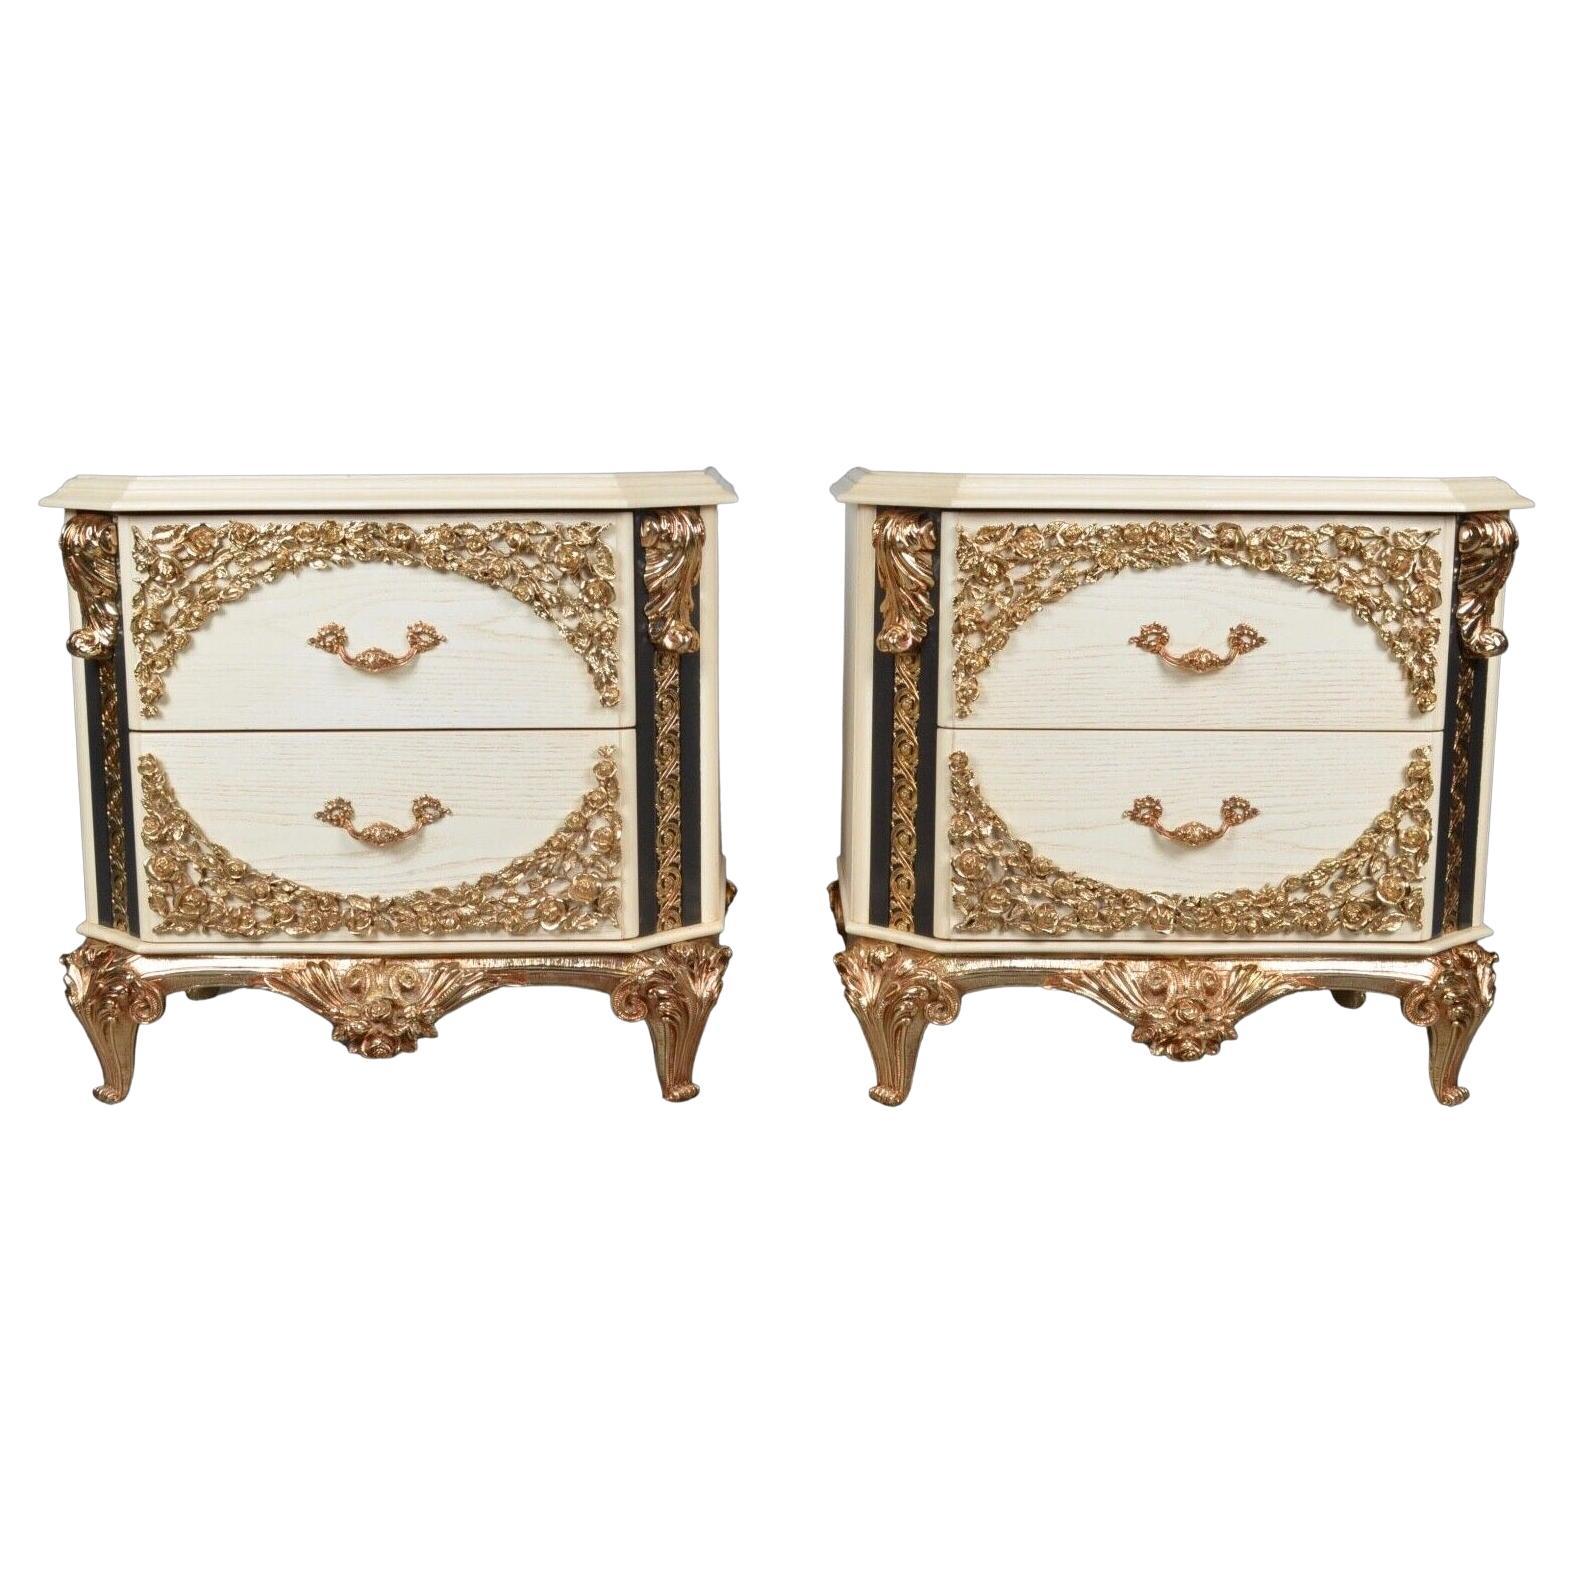 We are delighted to offer for sale these lovely pair of rare rococo Vidal Grau bedside tables. 

Their furniture range was based on a contemporary design using traditional quality materials such as wood, metal, glass, marble, and other innovative